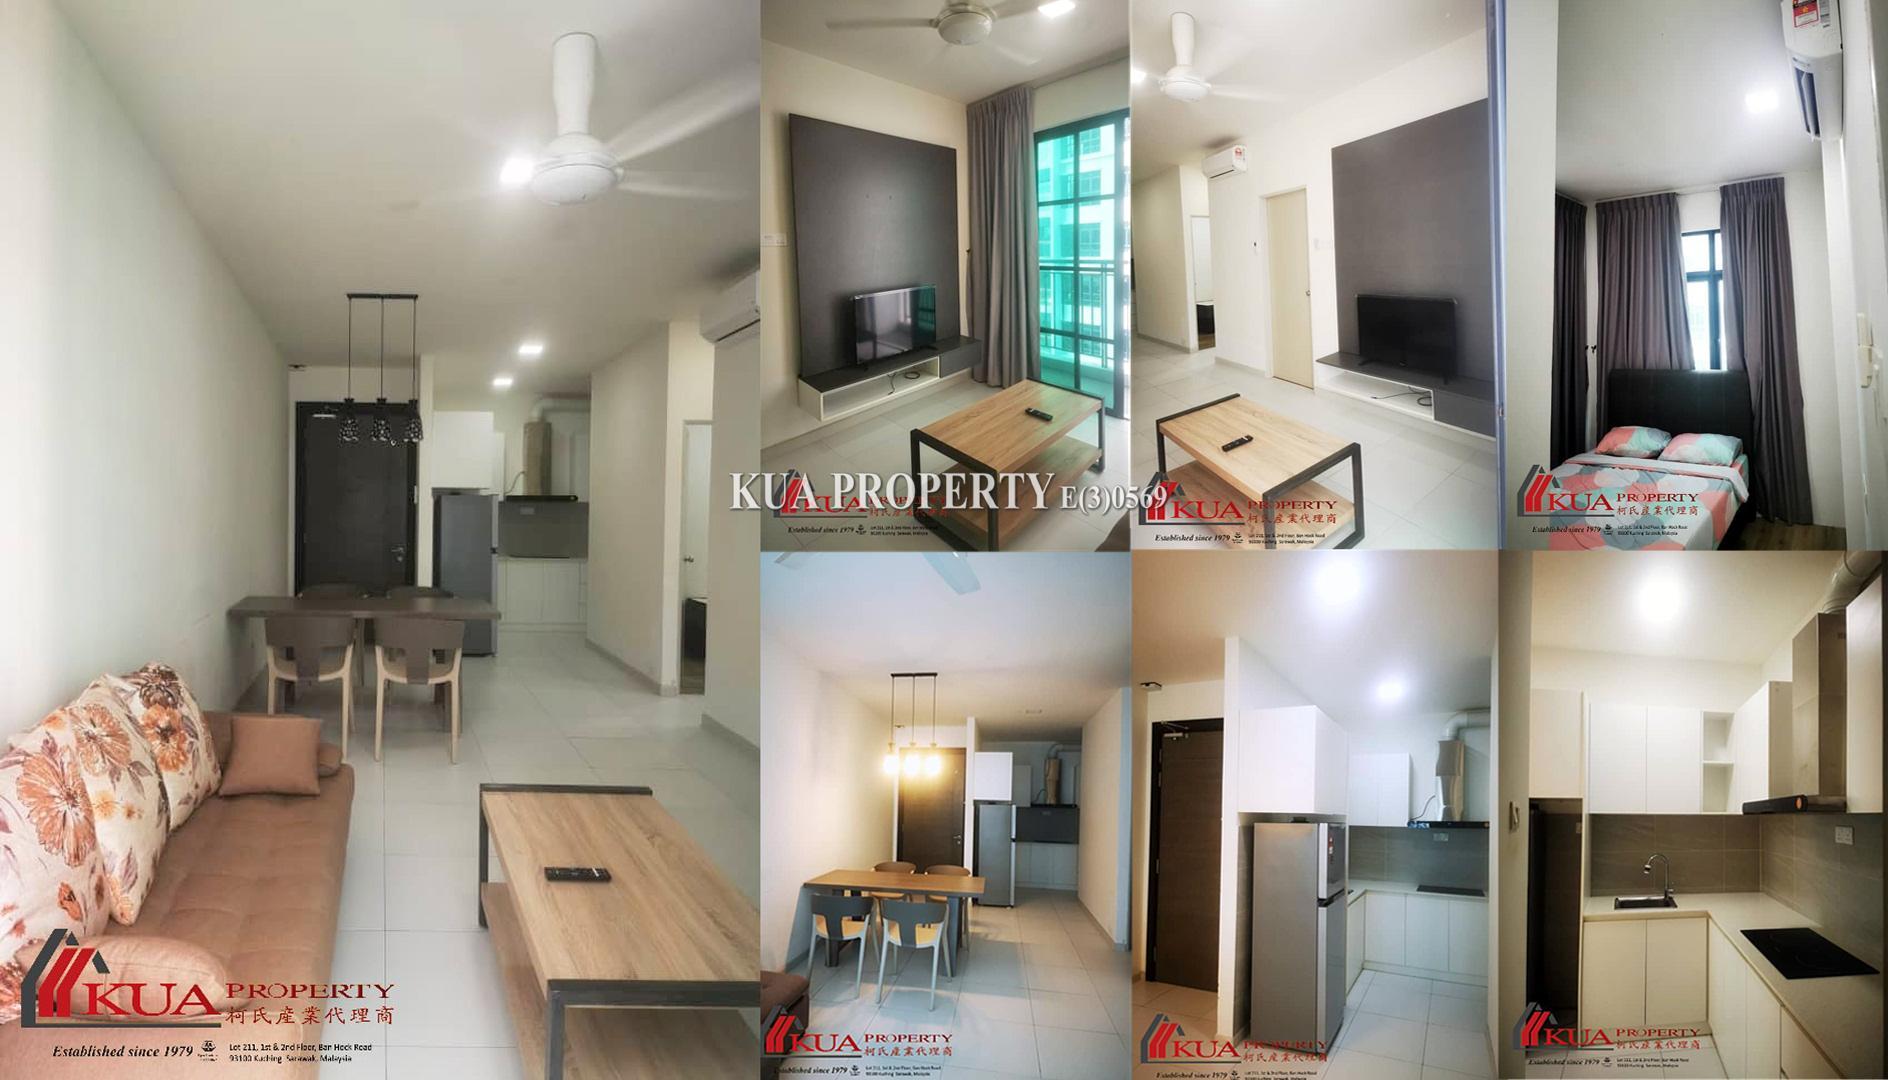 Sapphire On the Park Apartment For Rent & For Sale! Batu Lintang